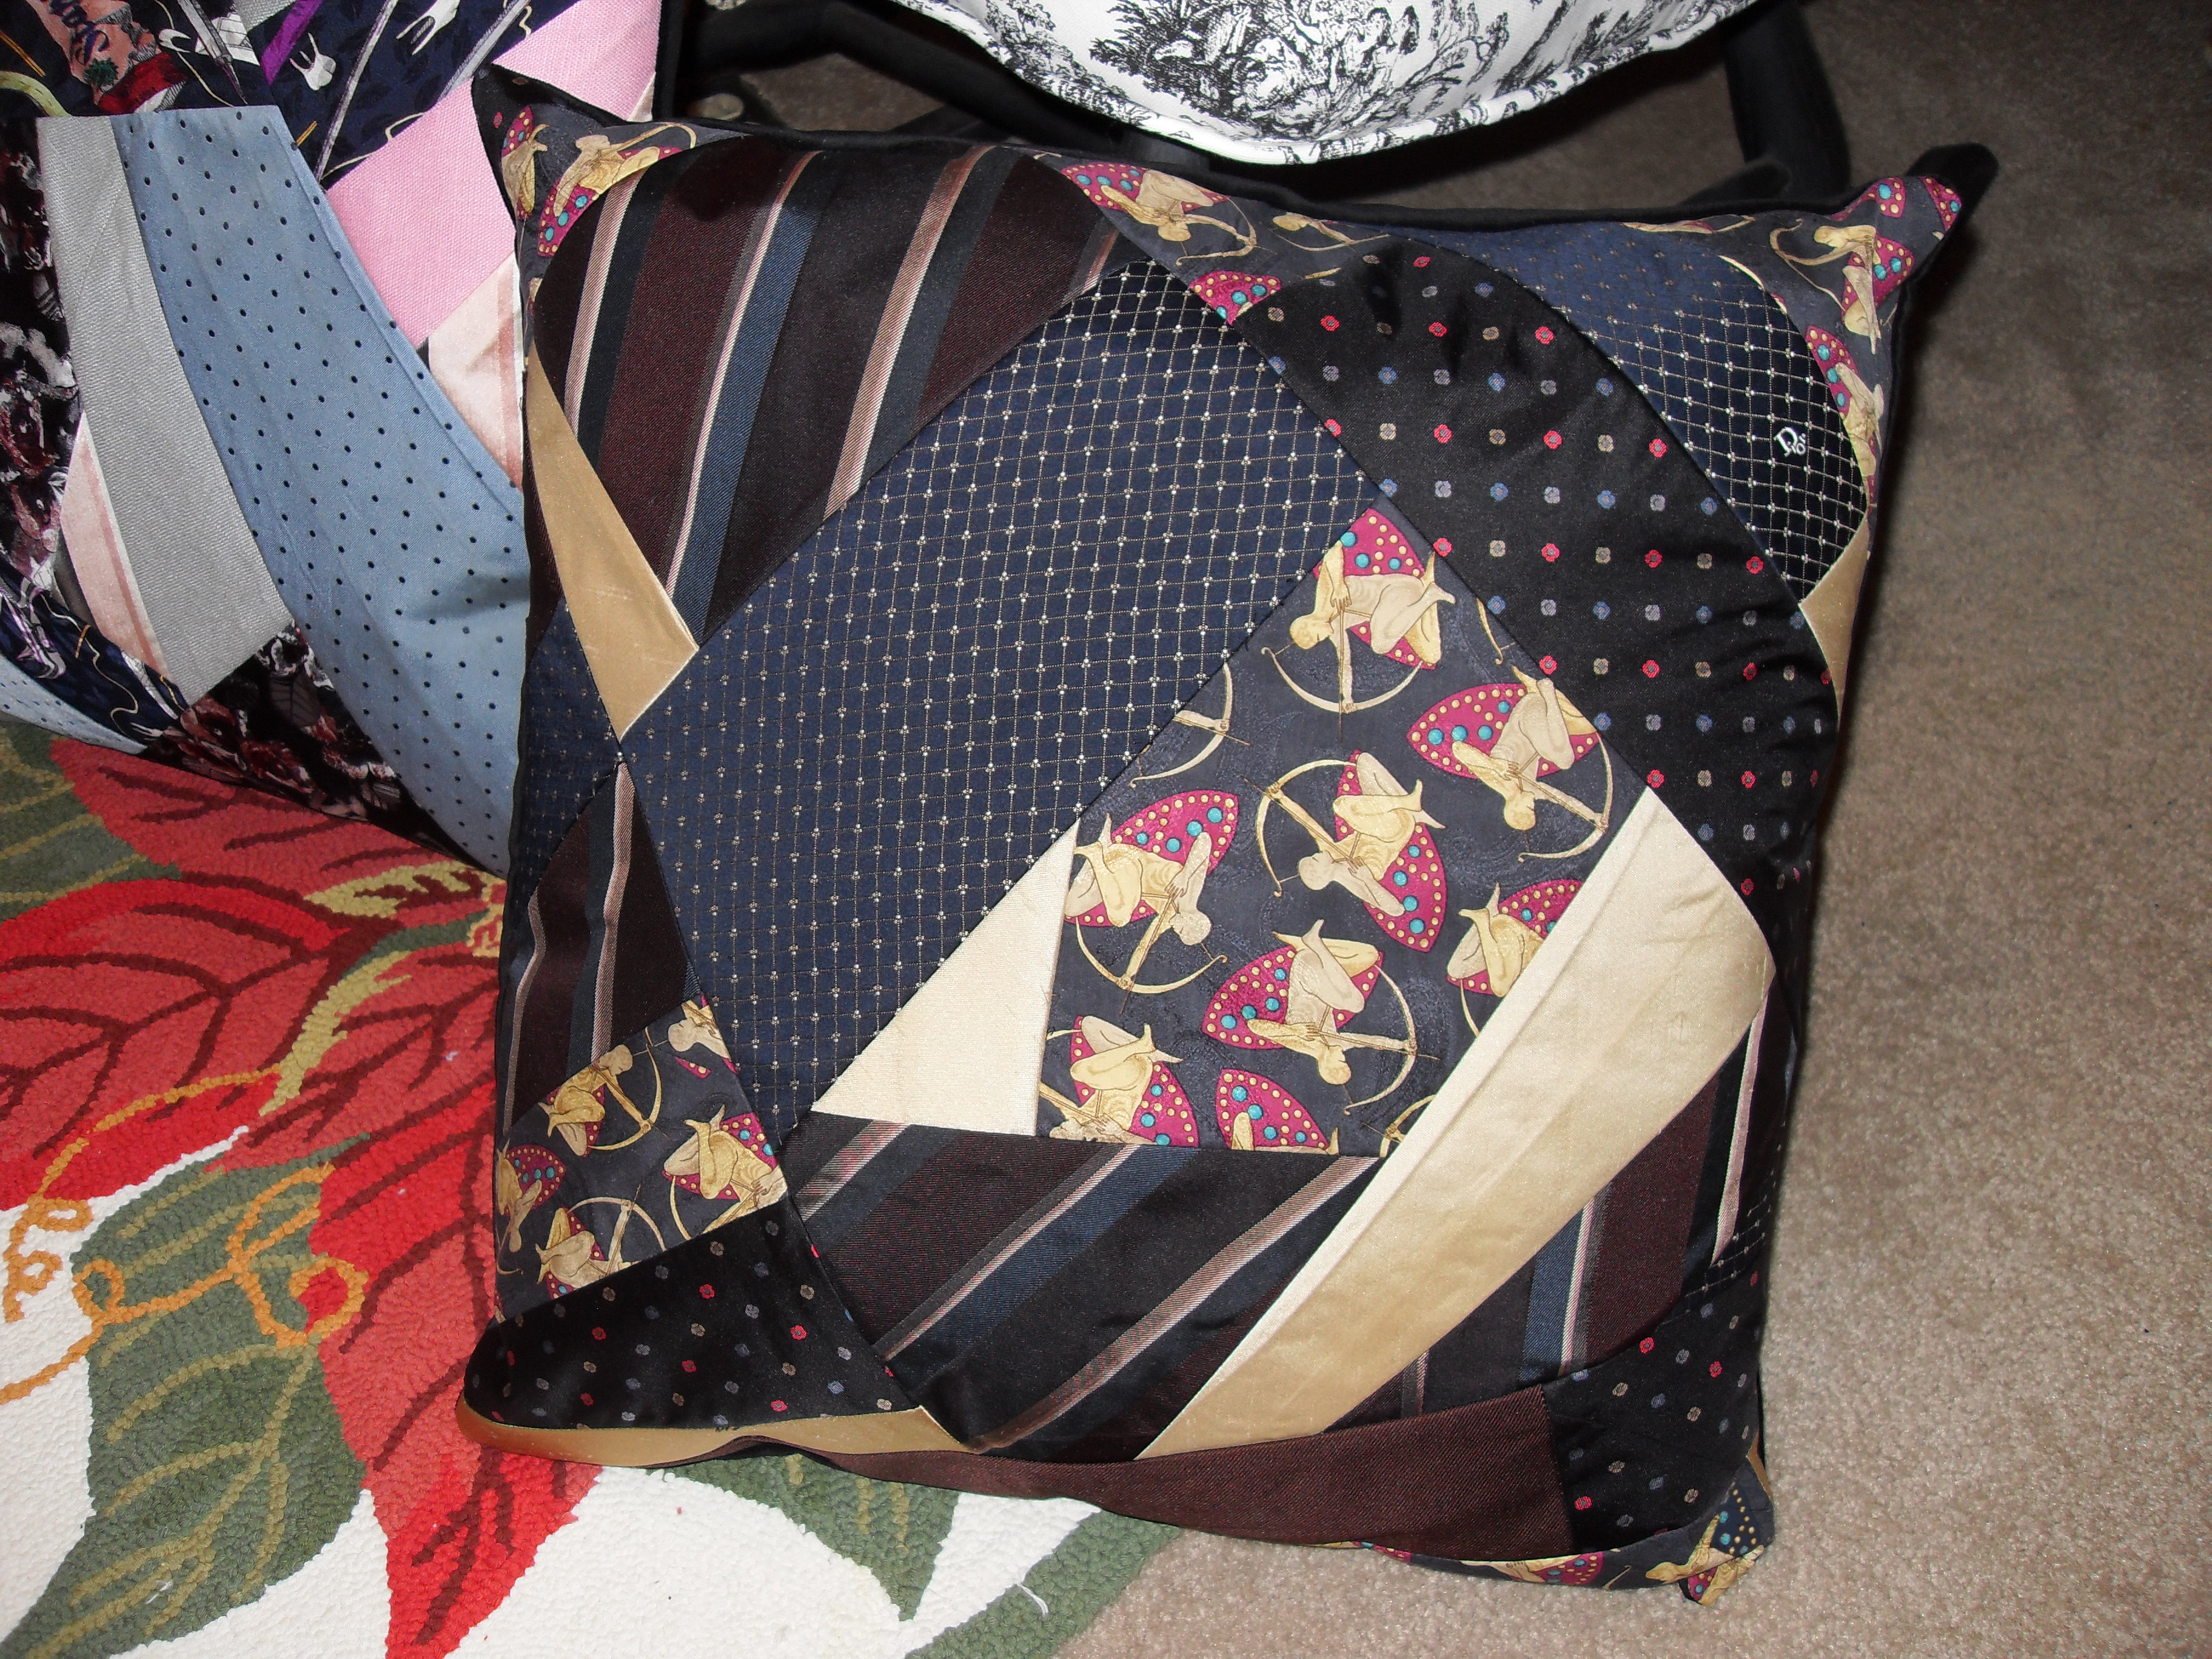 Crazy quilt tie Pillows
$40 custom design fee - You supply ties, backing & pillow form.